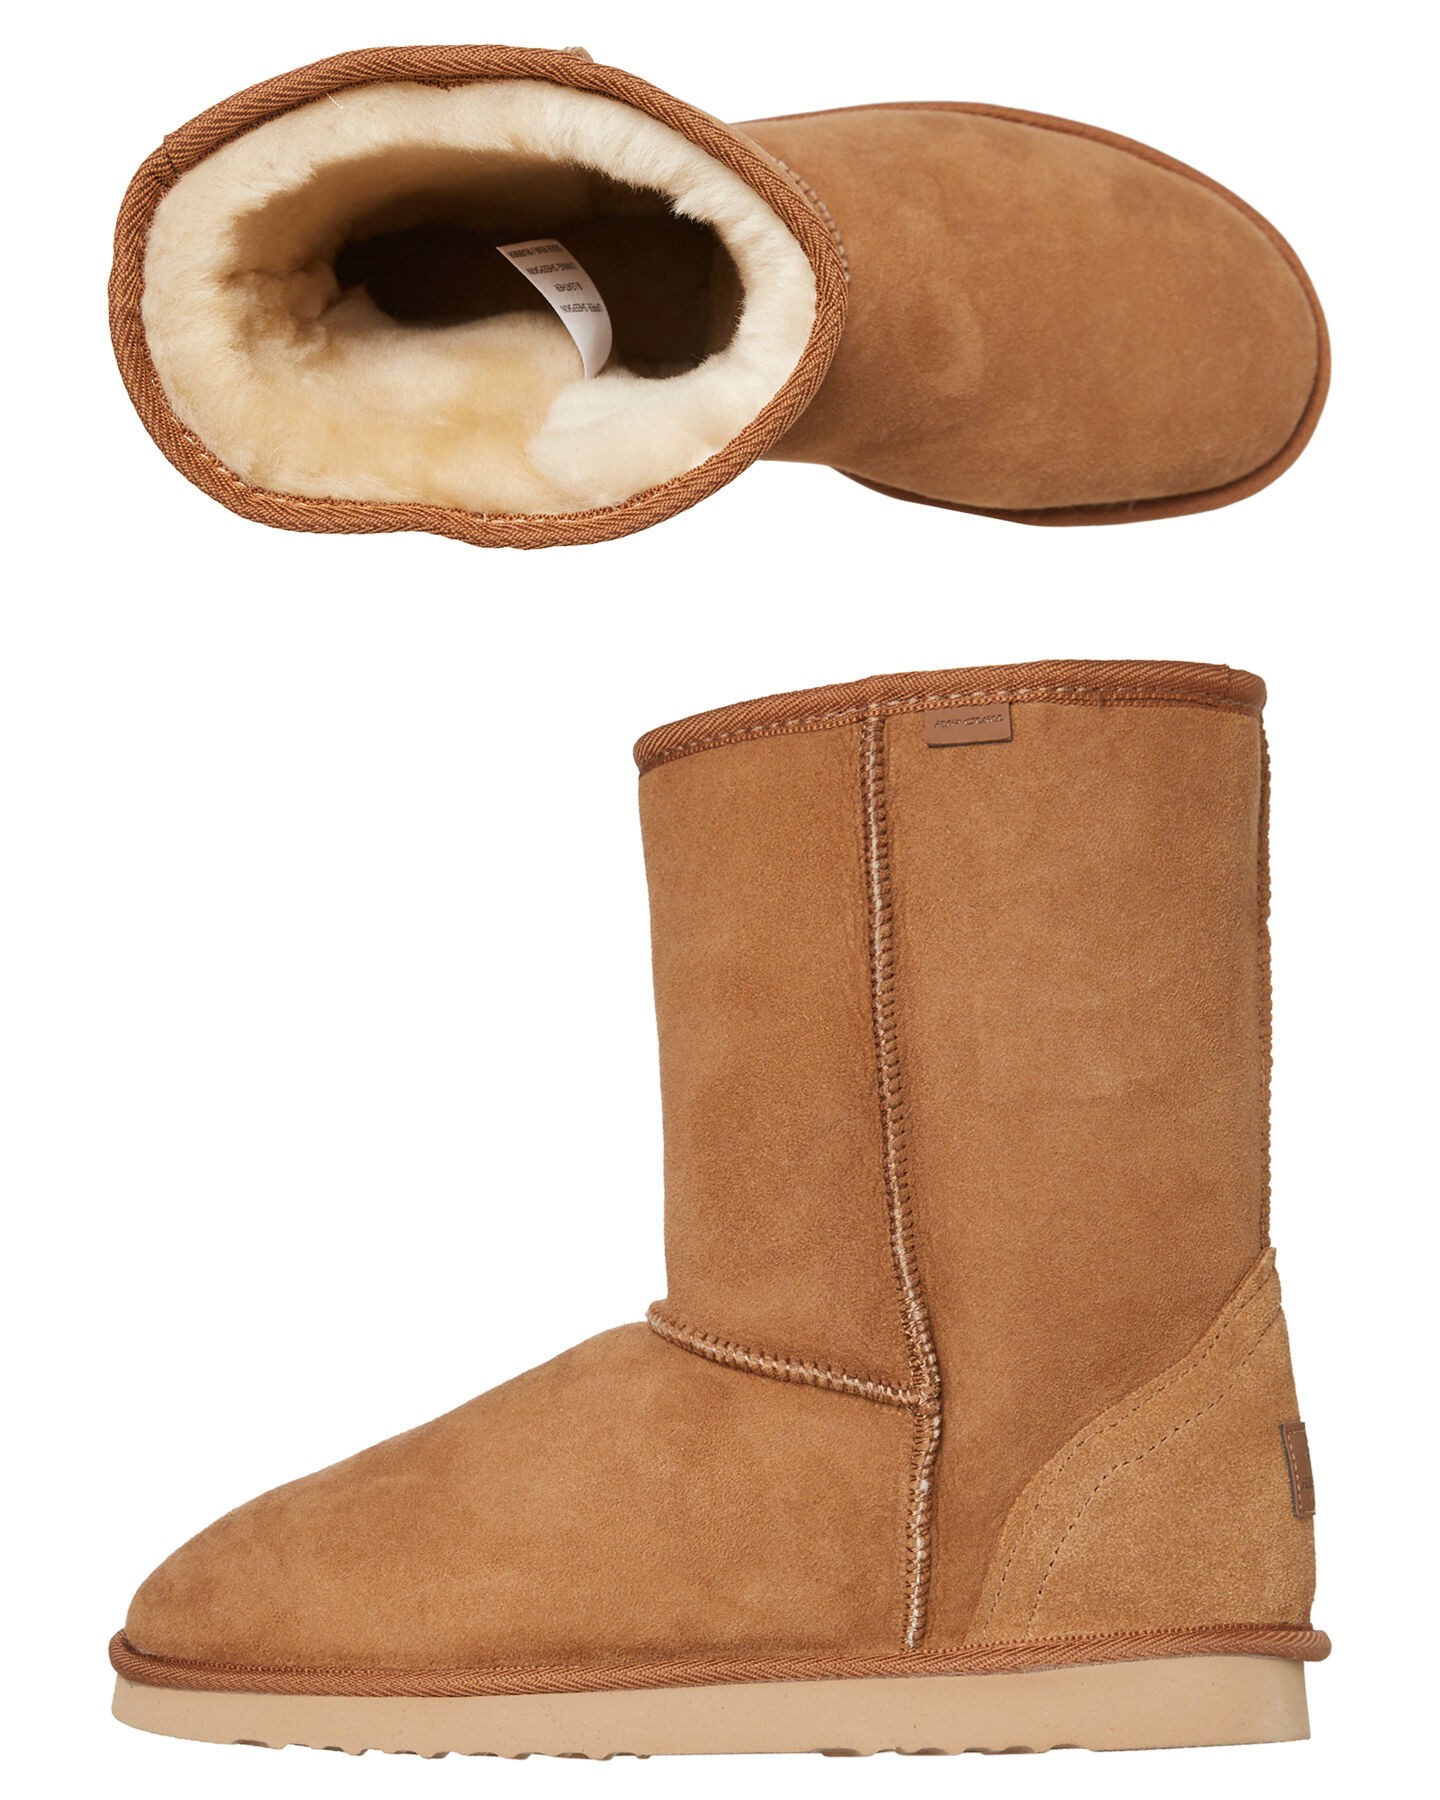 rip curl ugg boots